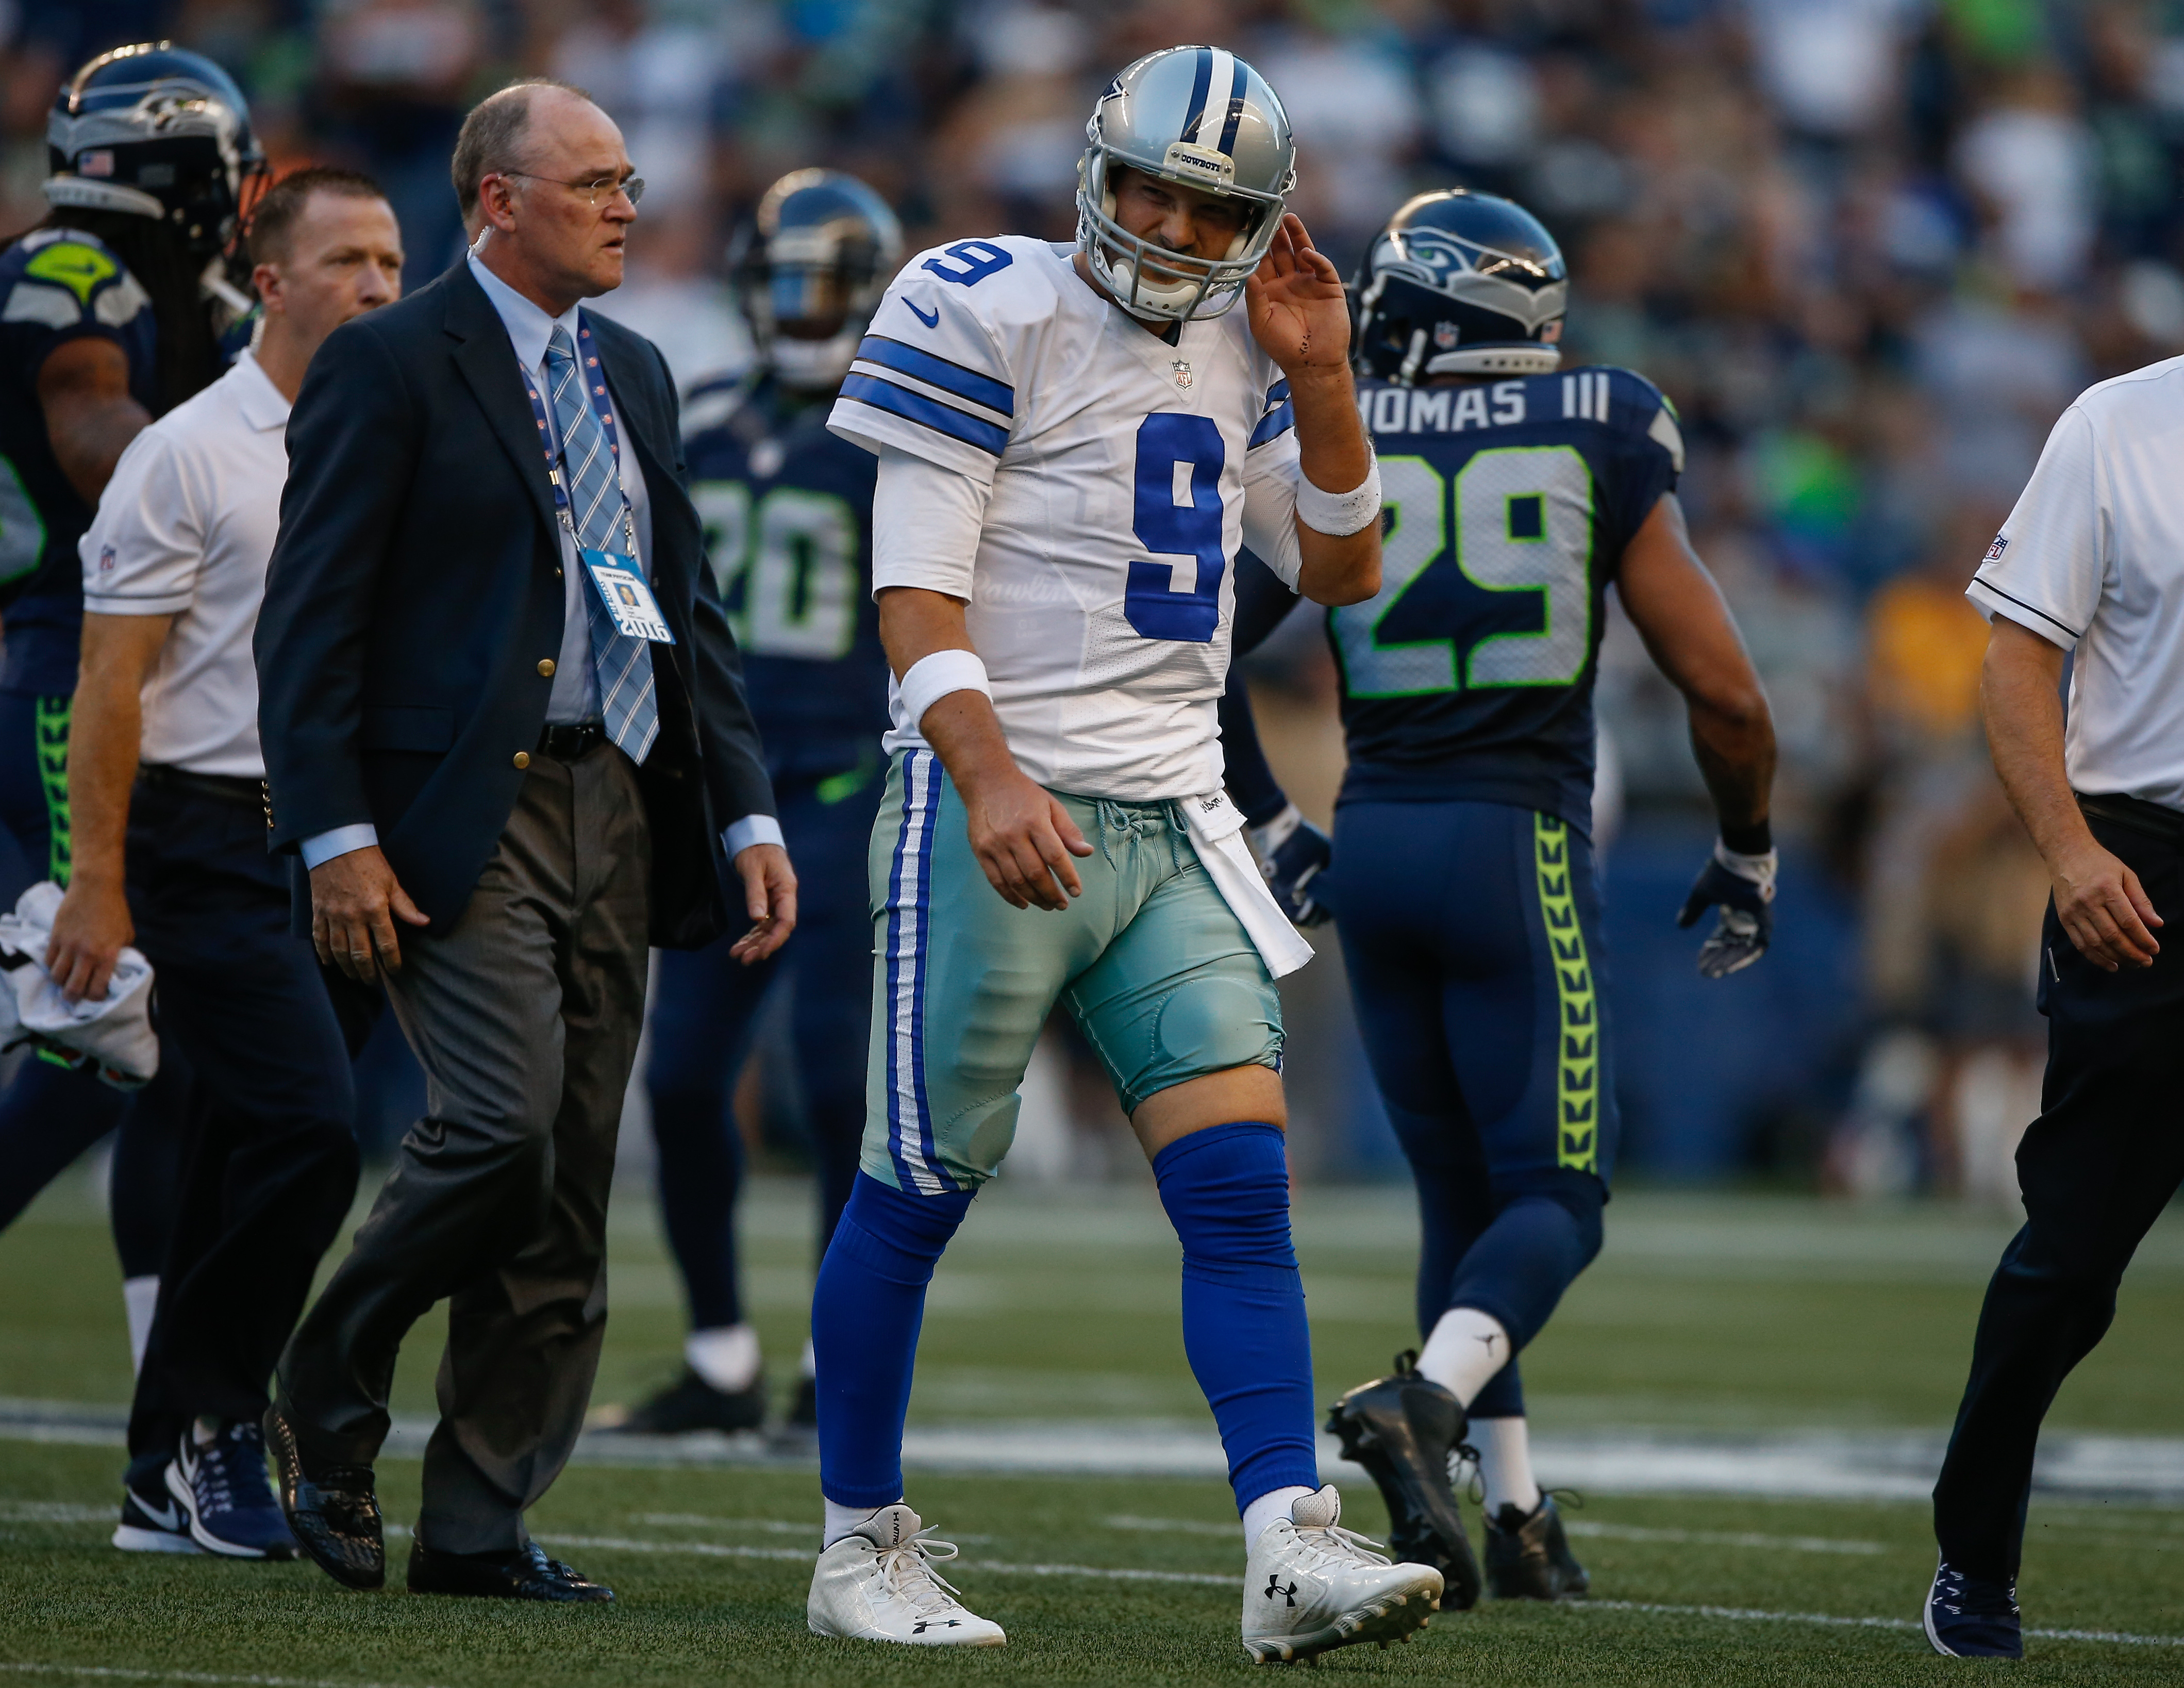 Quarterback Tony Romo of the Dallas Cowboys leaves the field after being injured during a preseason game against the Seattle Seahawks in Seattle, Washington, on Aug. 25, 2016. (Otto Greule Jr—Getty Images)